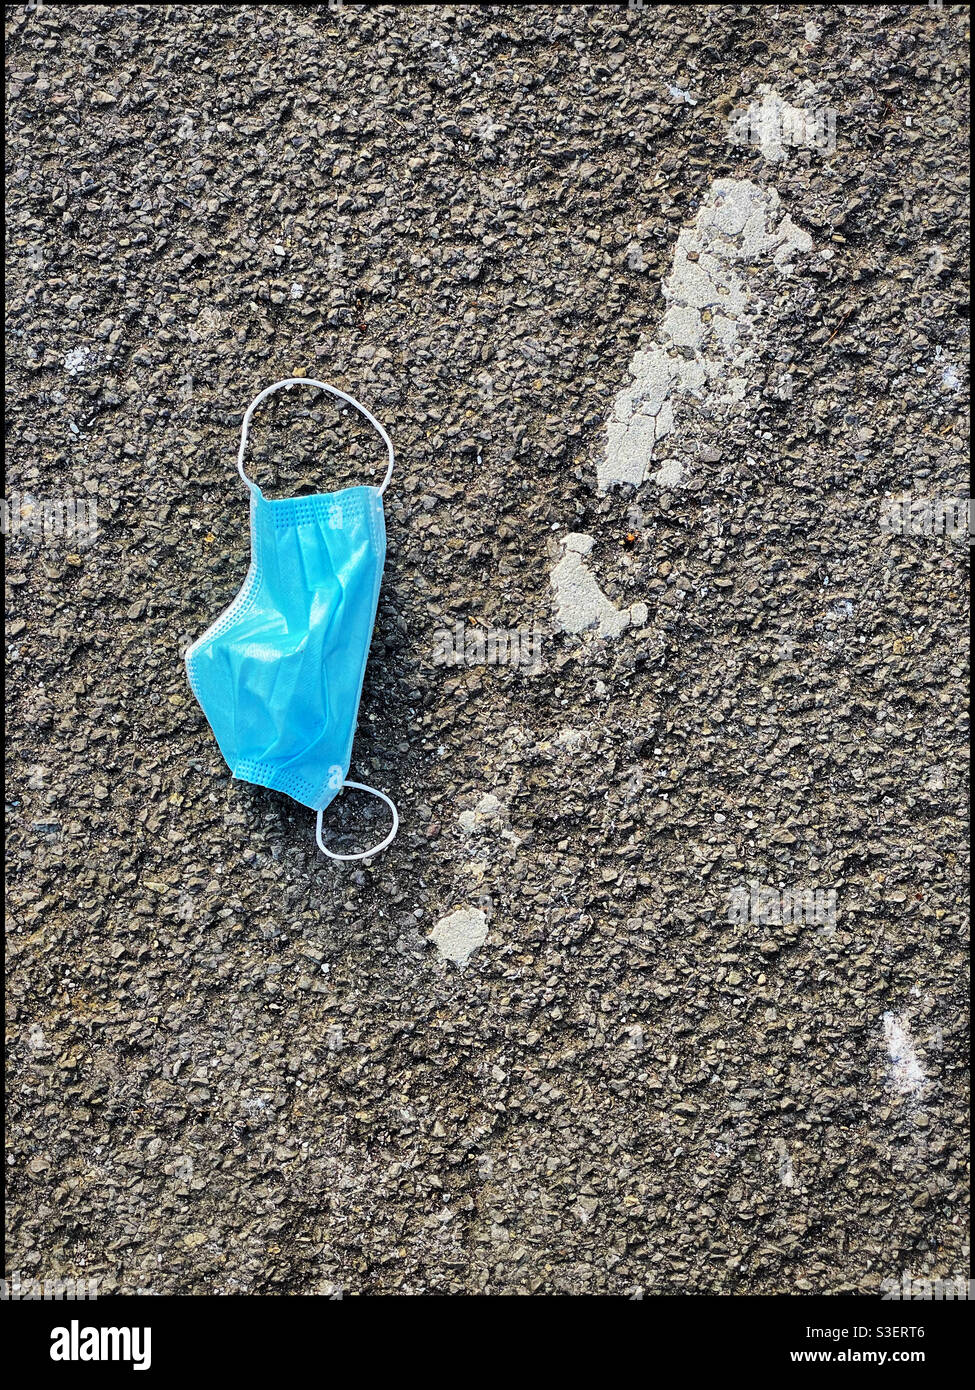 A discarded face mask - thrown away and left to pollute the environment. Sadly a familiar sight and a result of the Covid-19 global pandemic. Photo ©️ COLIN HOSKINS. Stock Photo